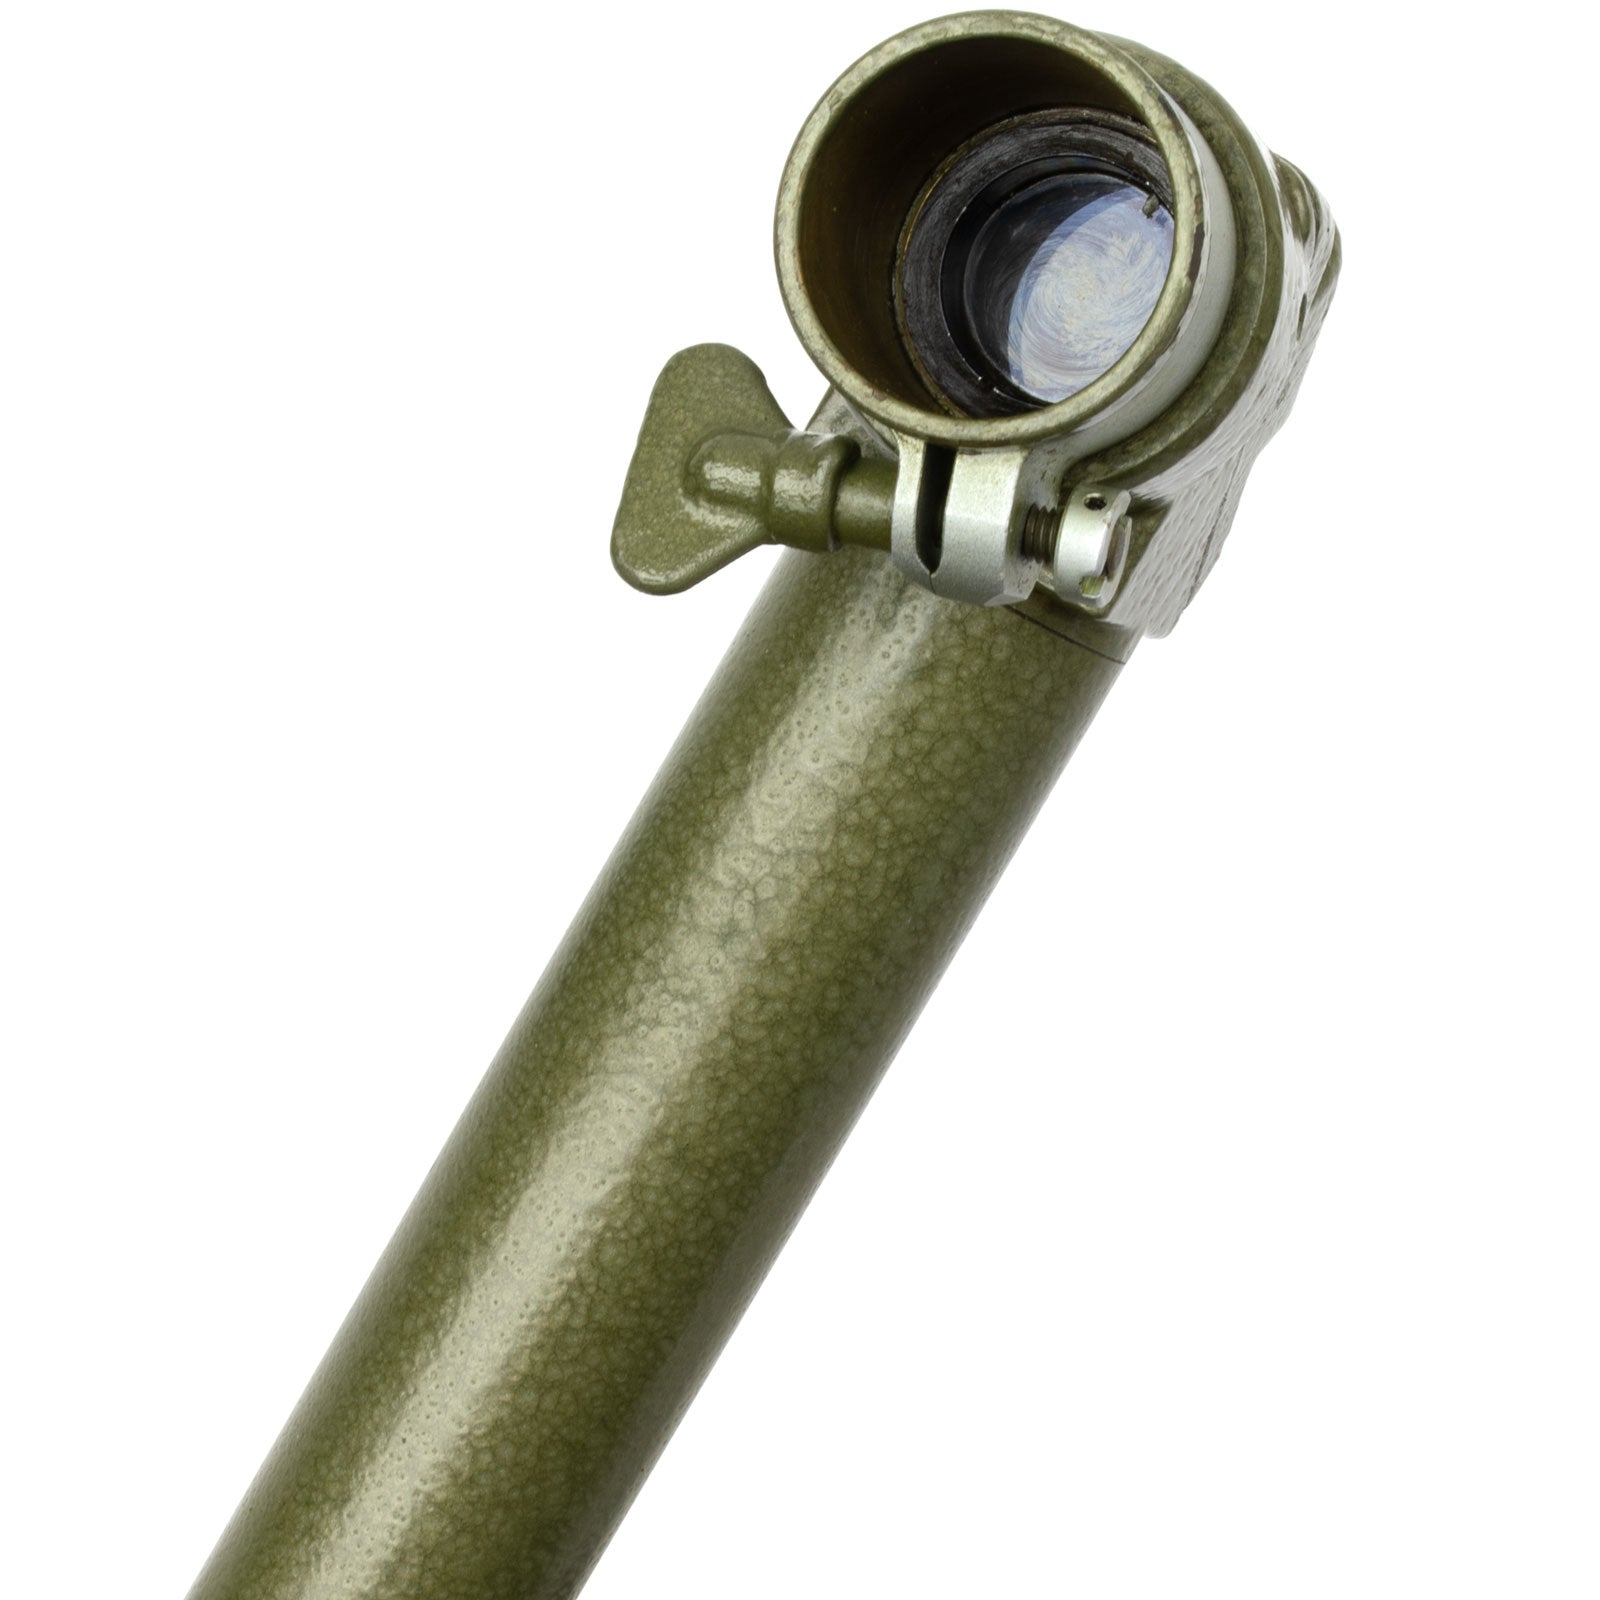 Hungarian Military Issue Periscope